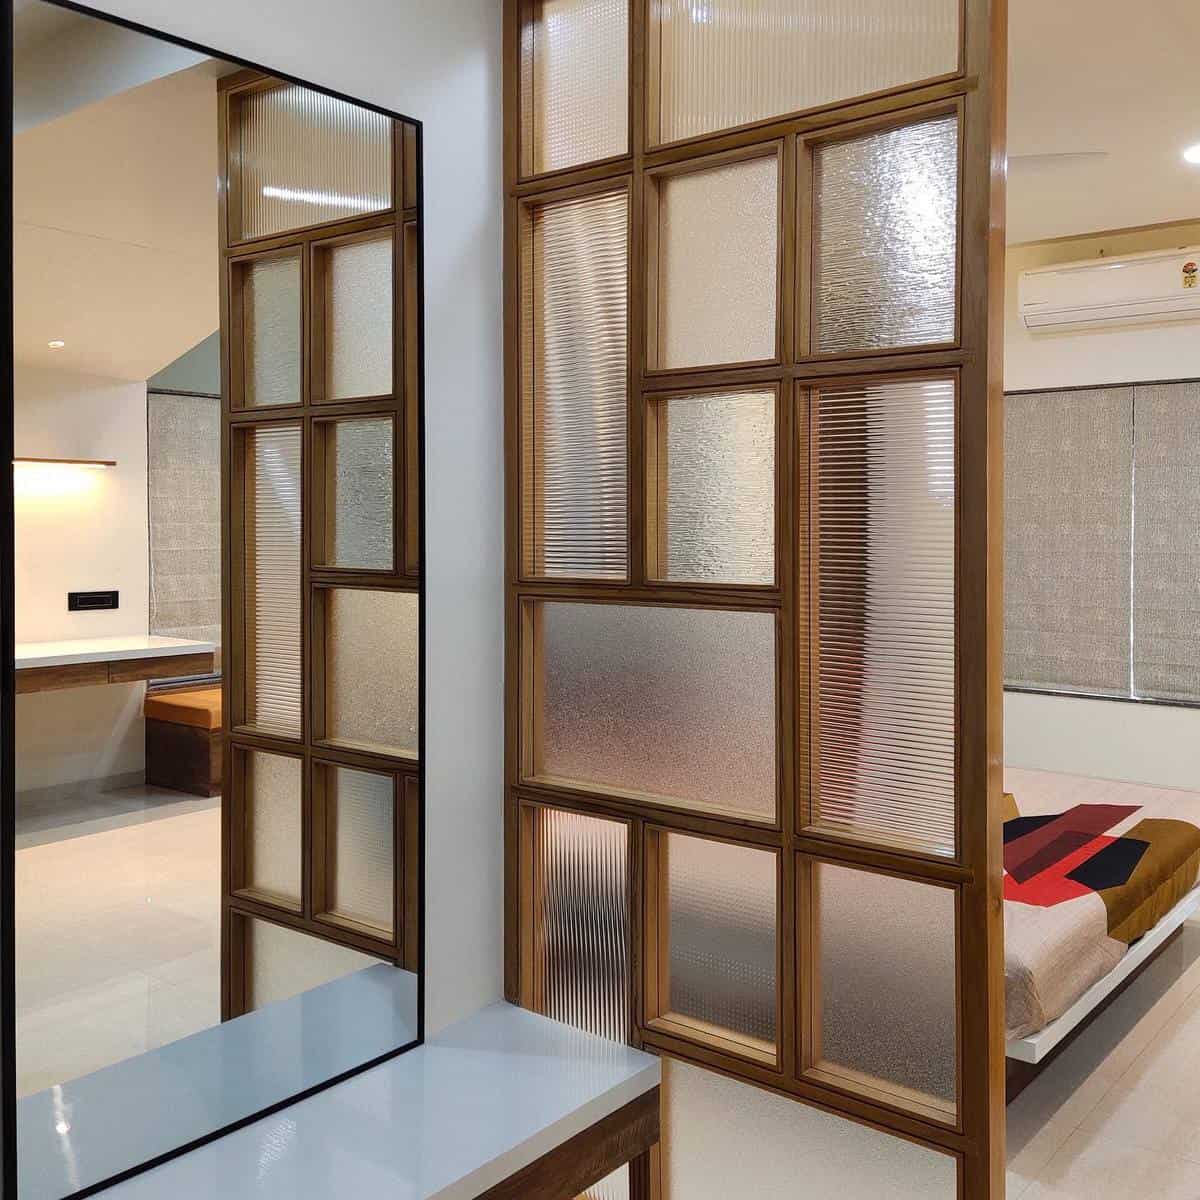 Temporary bedroom partition made of glass and wood 